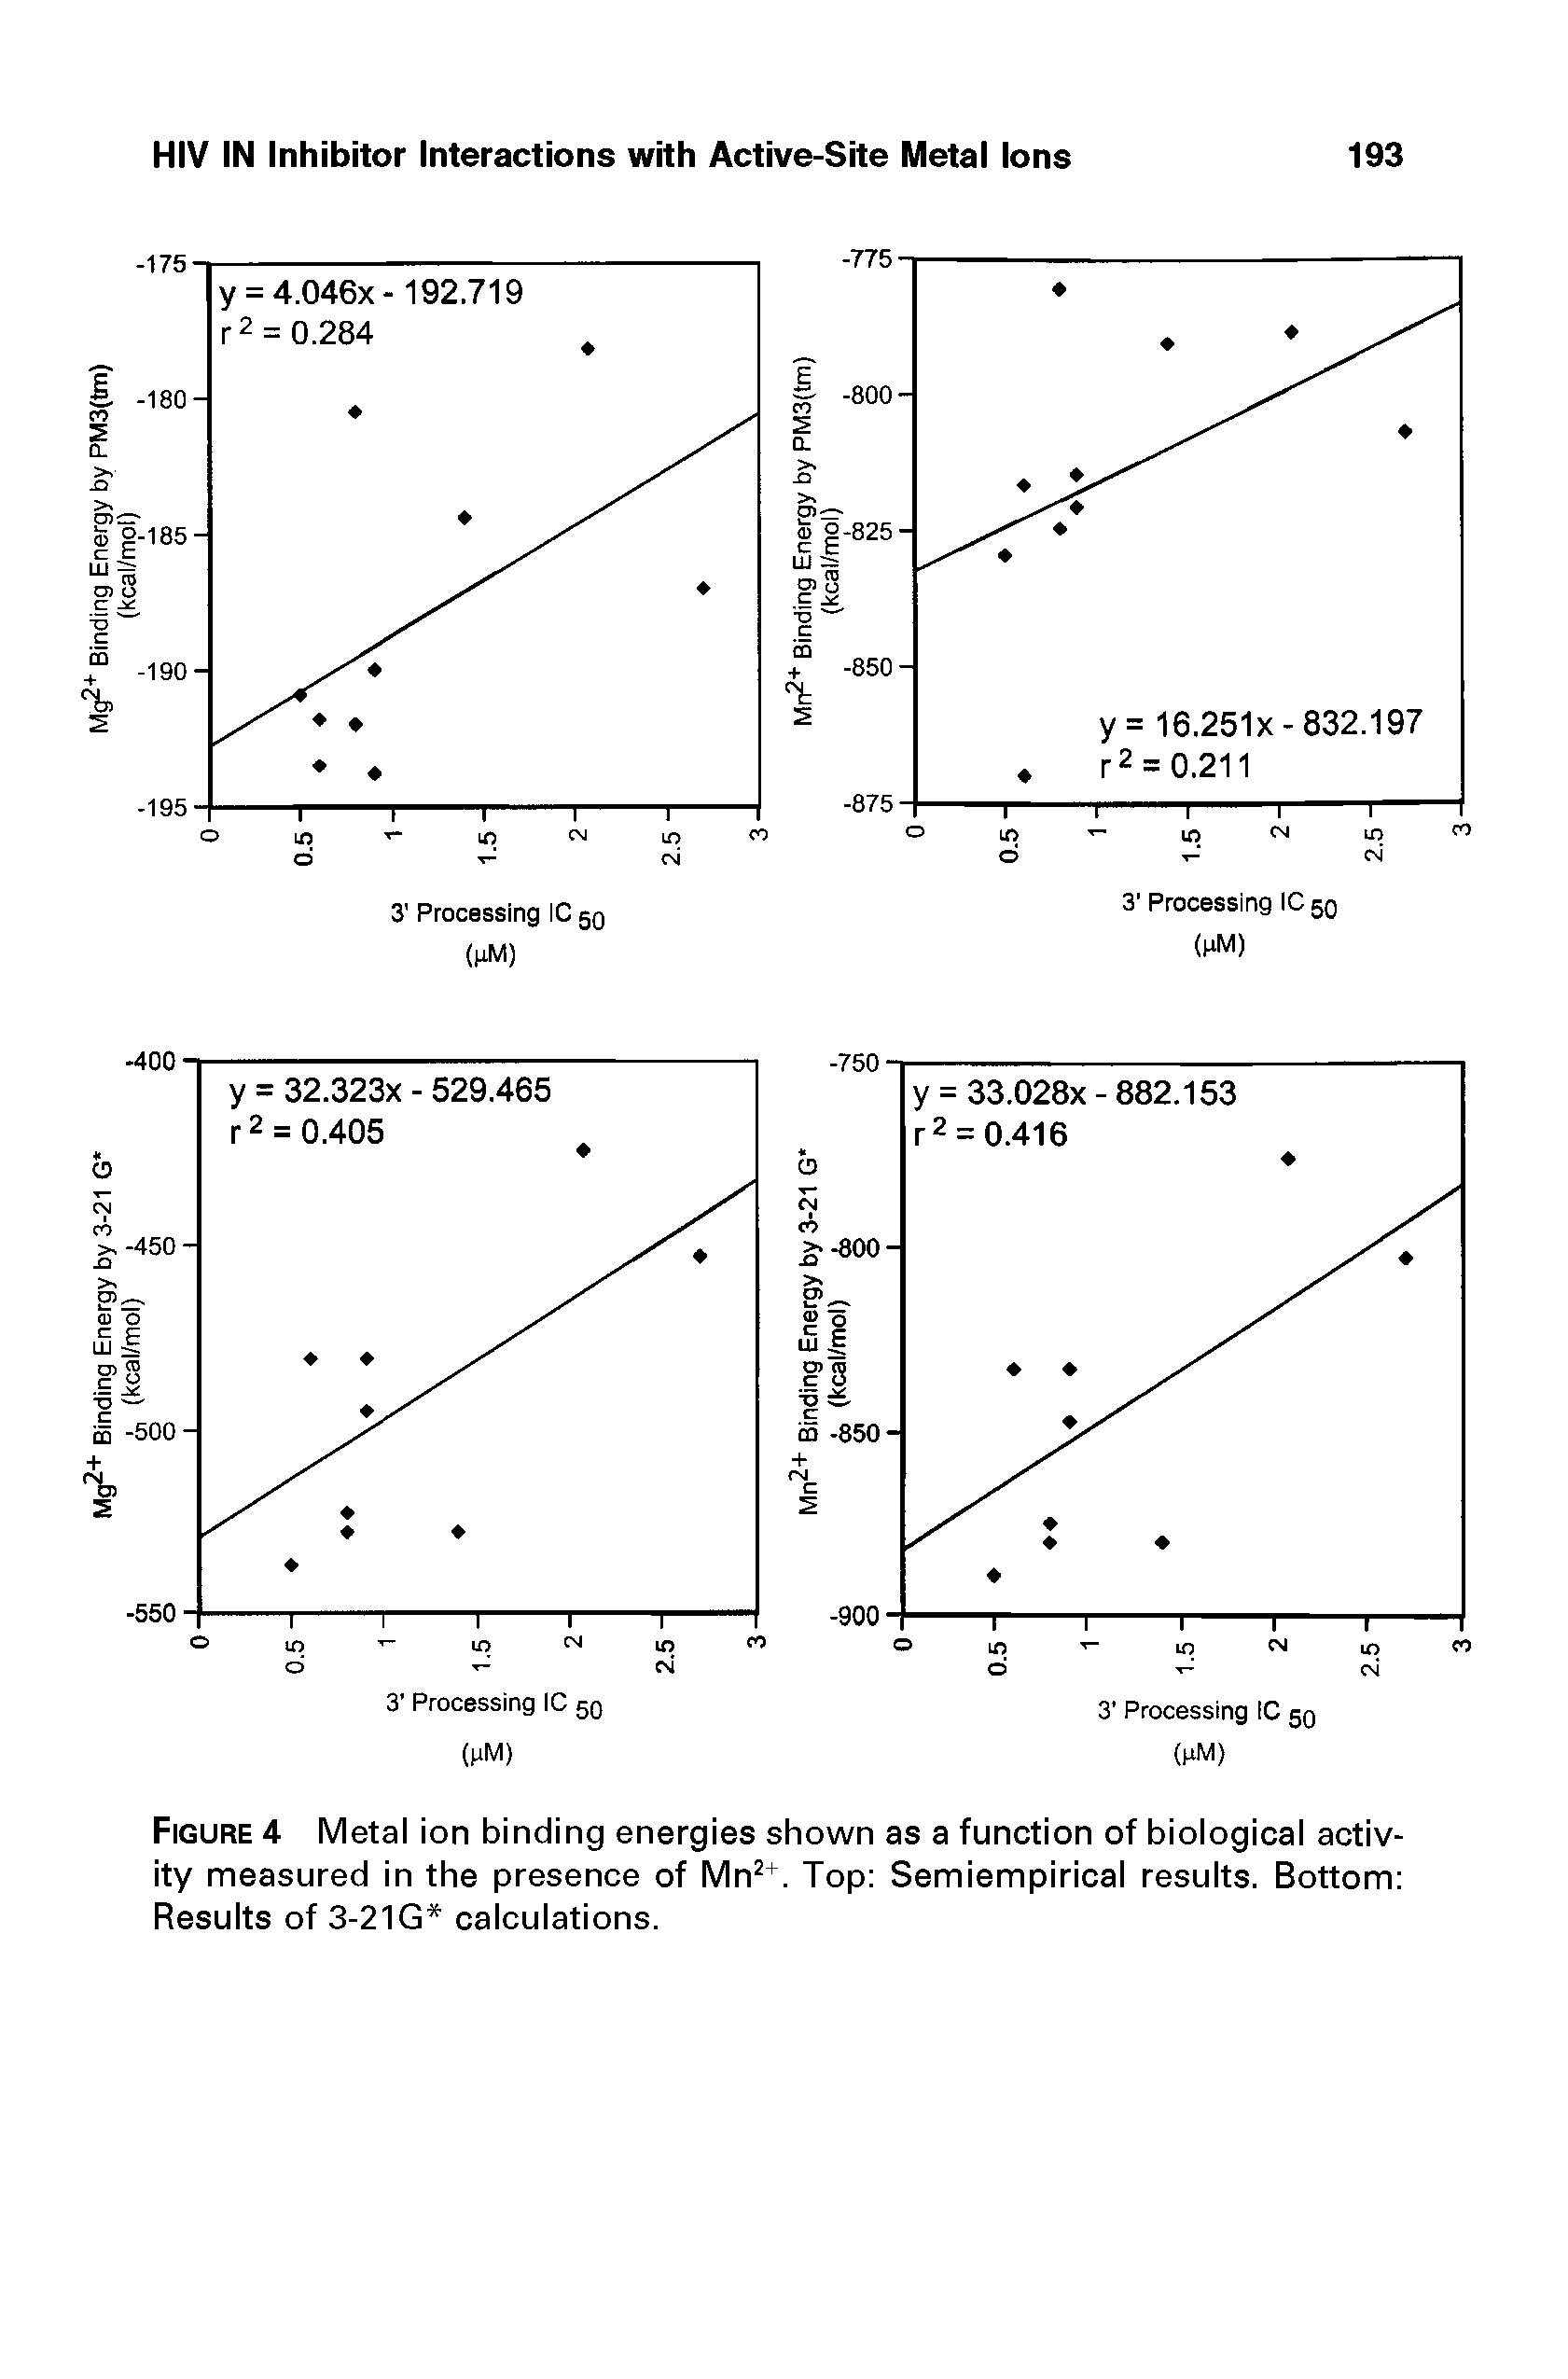 Figure 4 Metal ion binding energies shown as a function of biological activity measured in the presence of Mn +. Top Semiempirical results. Bottom Results of 3-21G calculations.